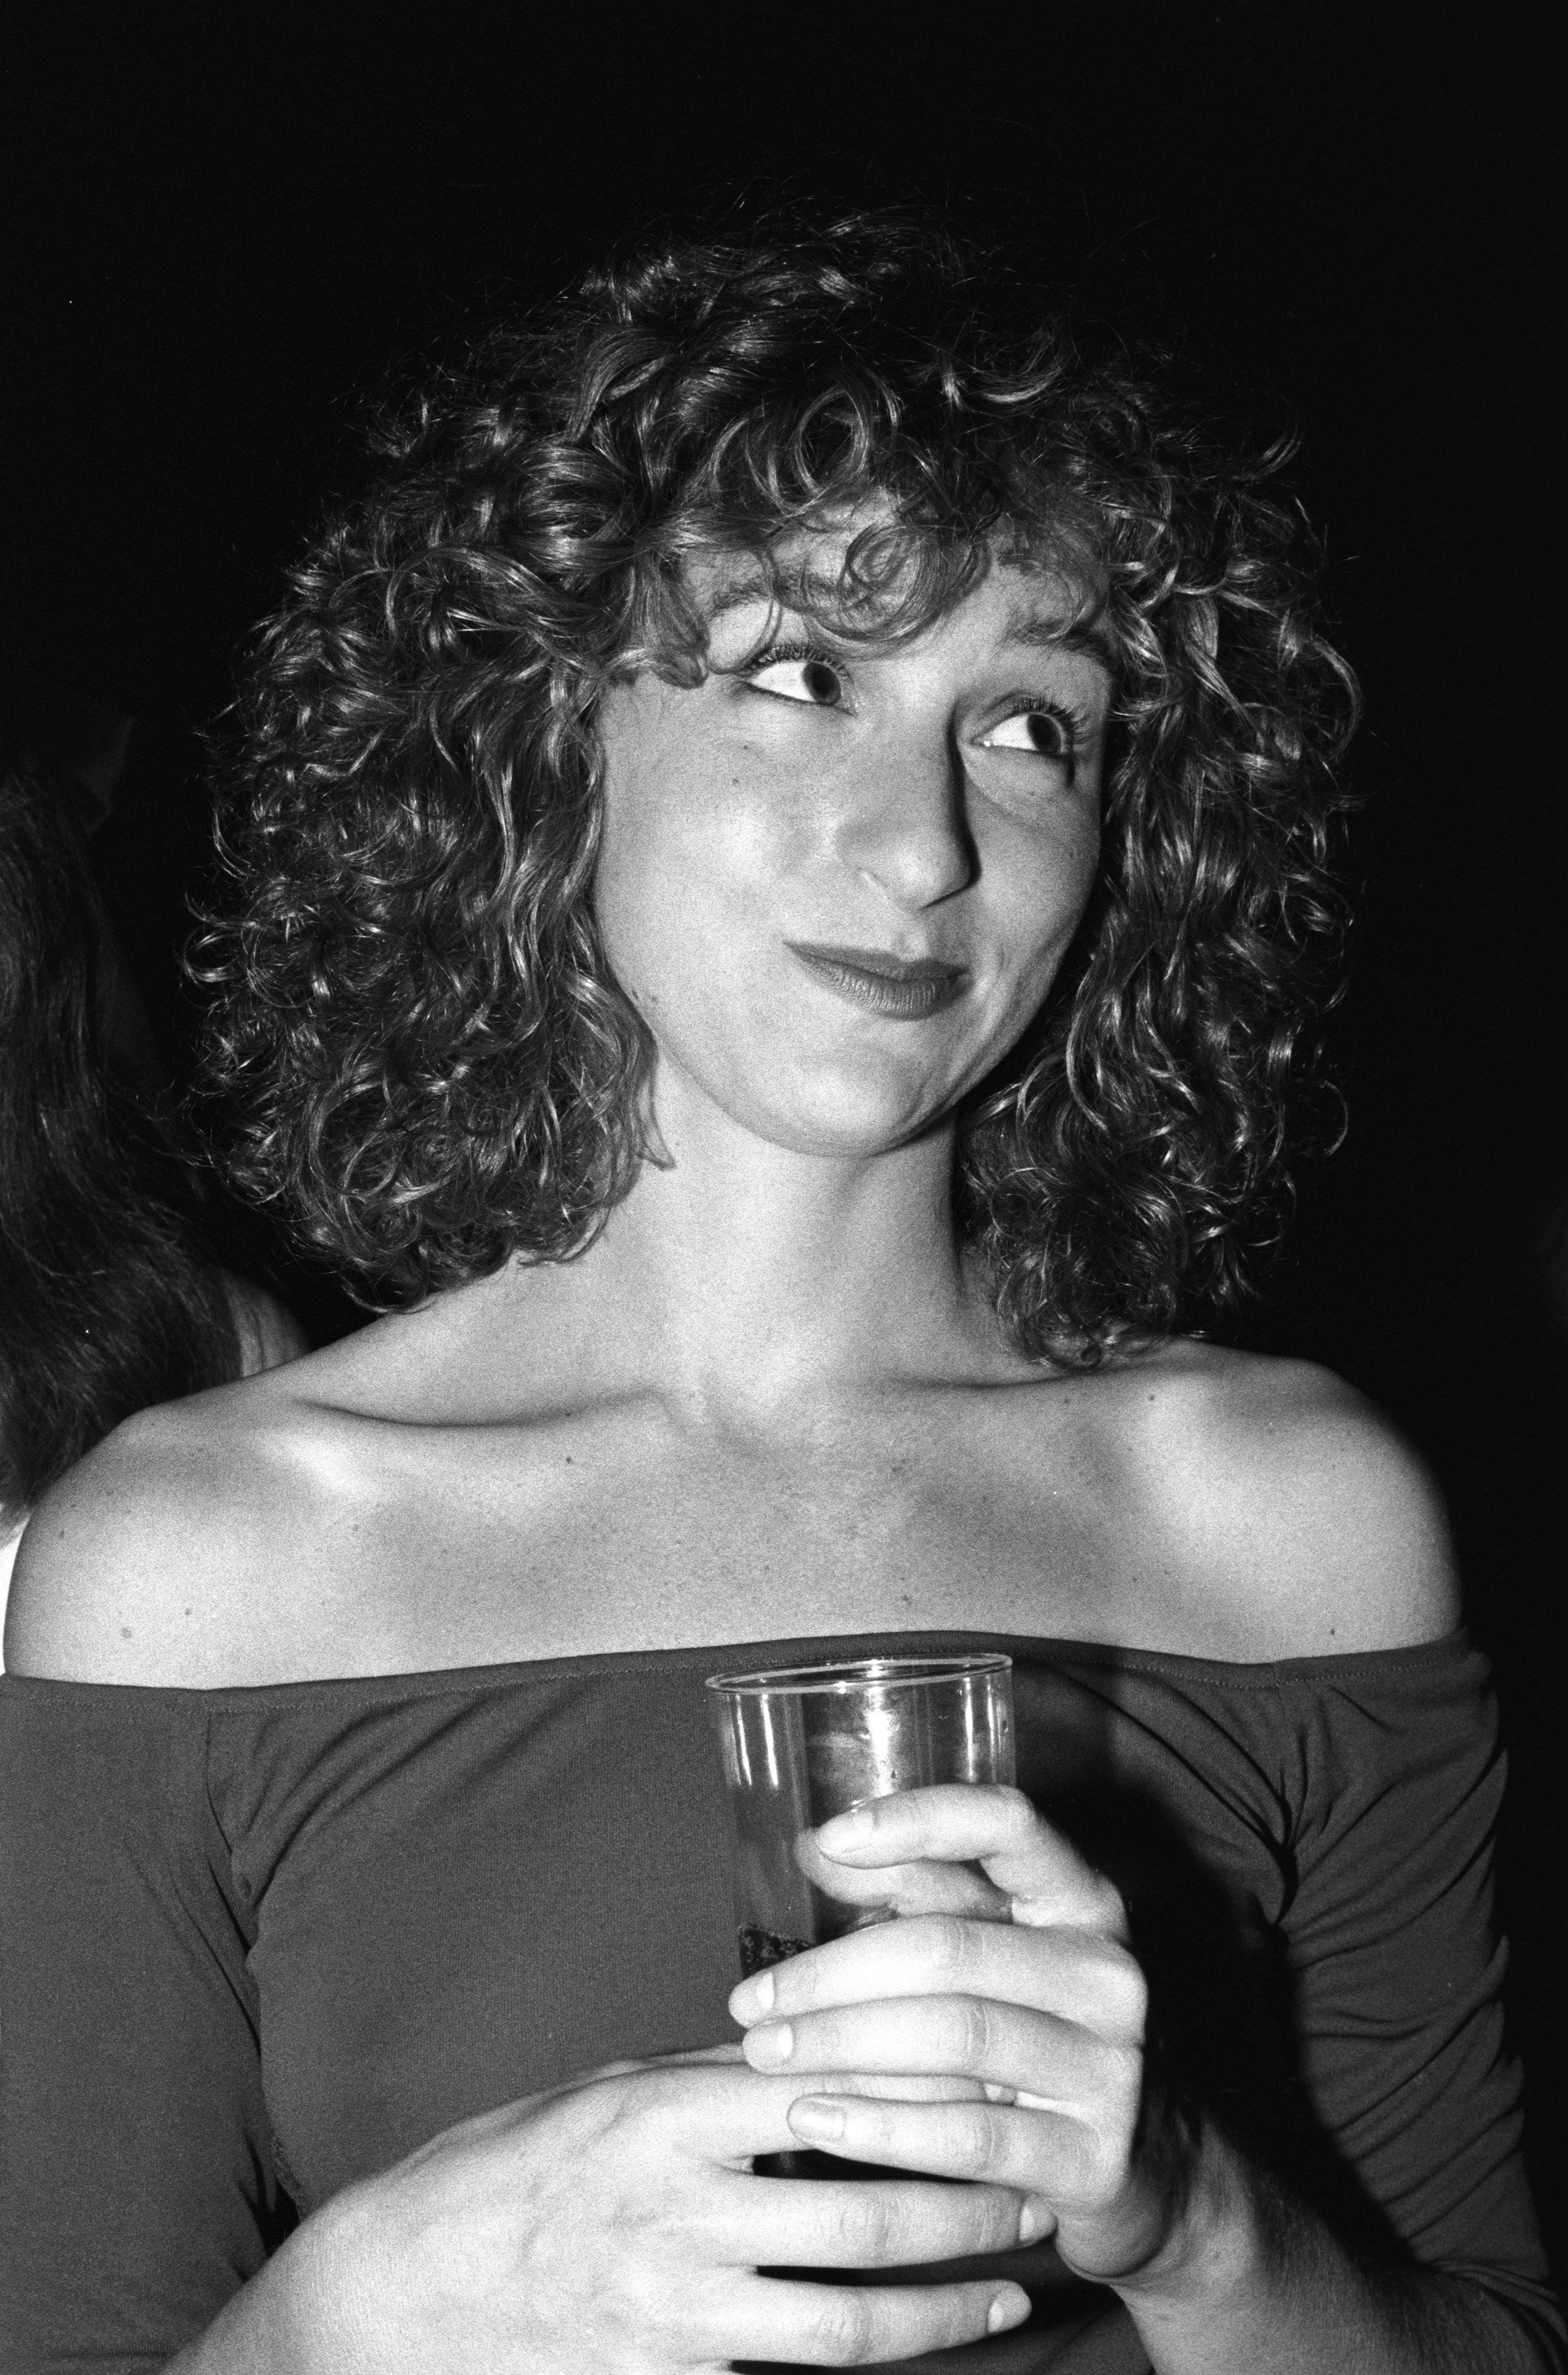 American actress Jennifer Gray poses for a photo at a party for the premiere of her film "Dirty Dancing" in August 1987 in New York City, New York | Source: Getty Images